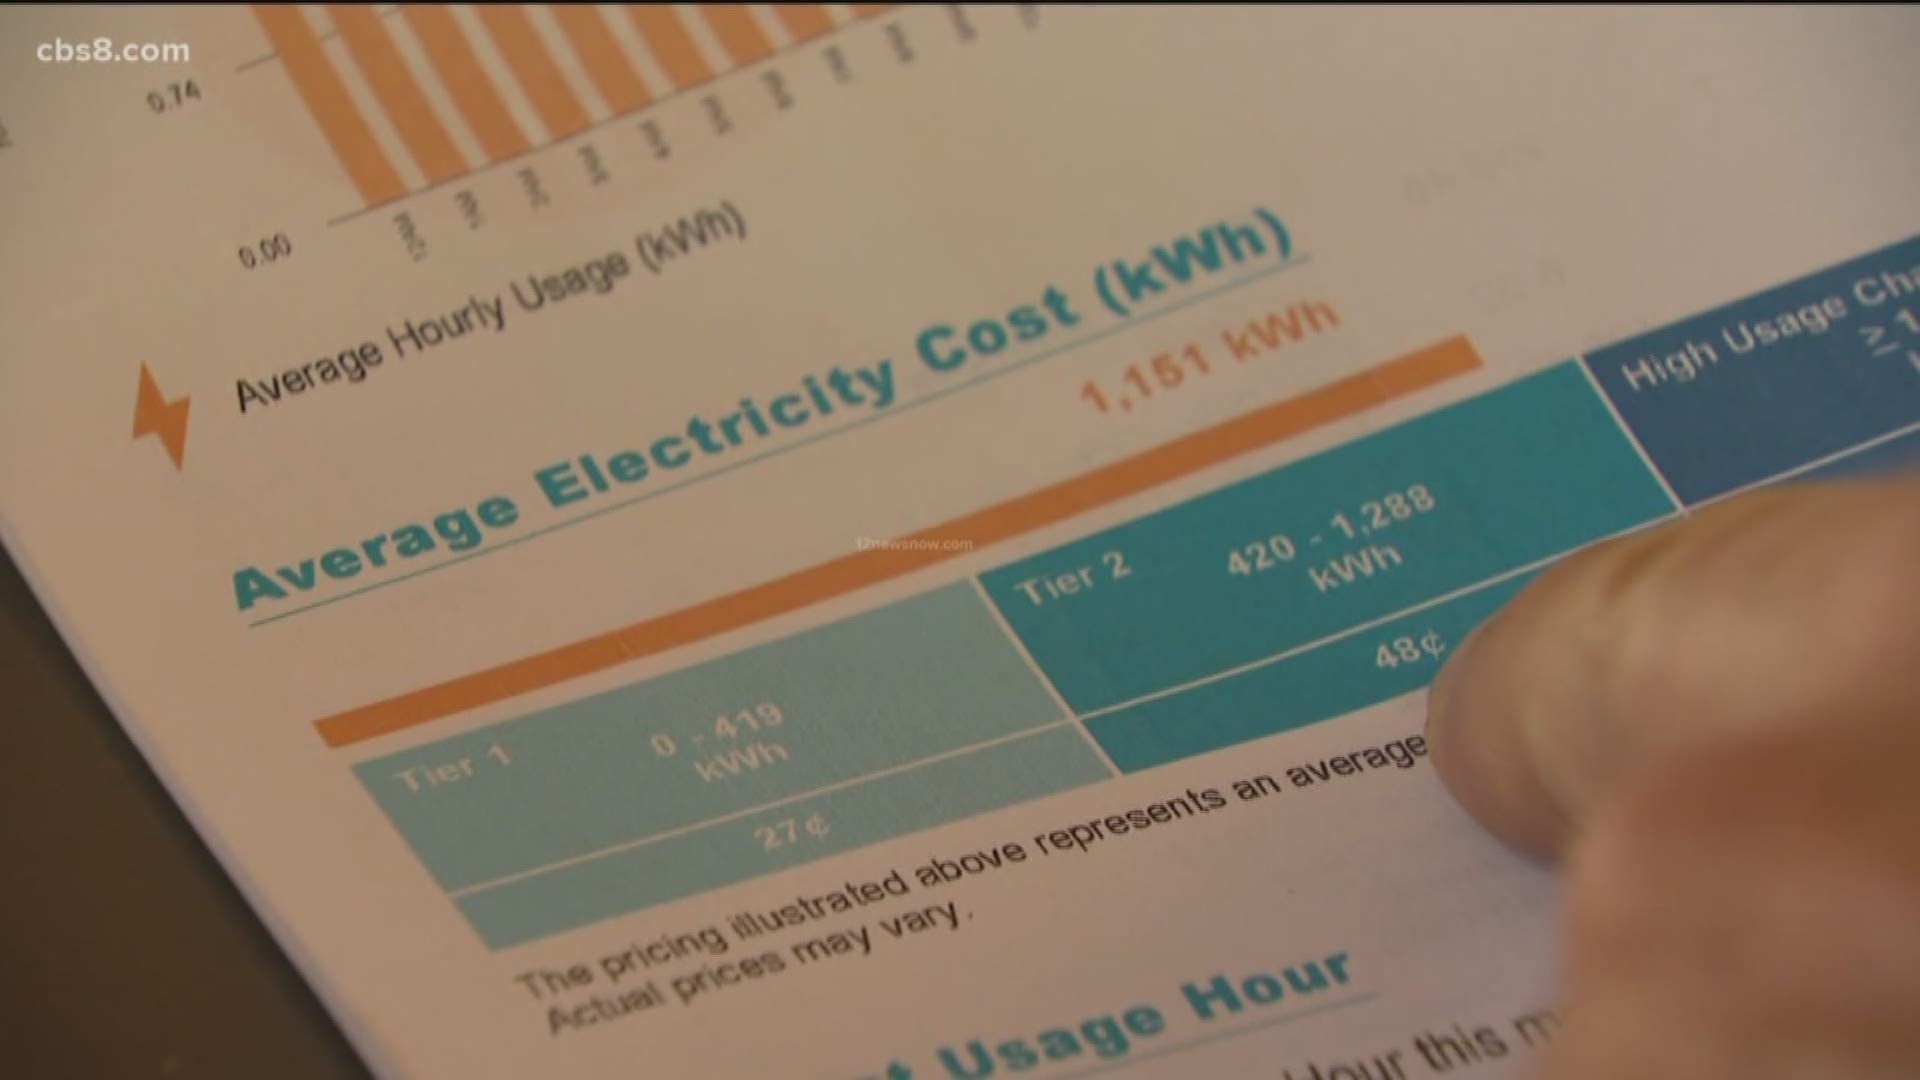 SDG&E is switching all of its 750,000 customers to new pricing plans based on time of use.